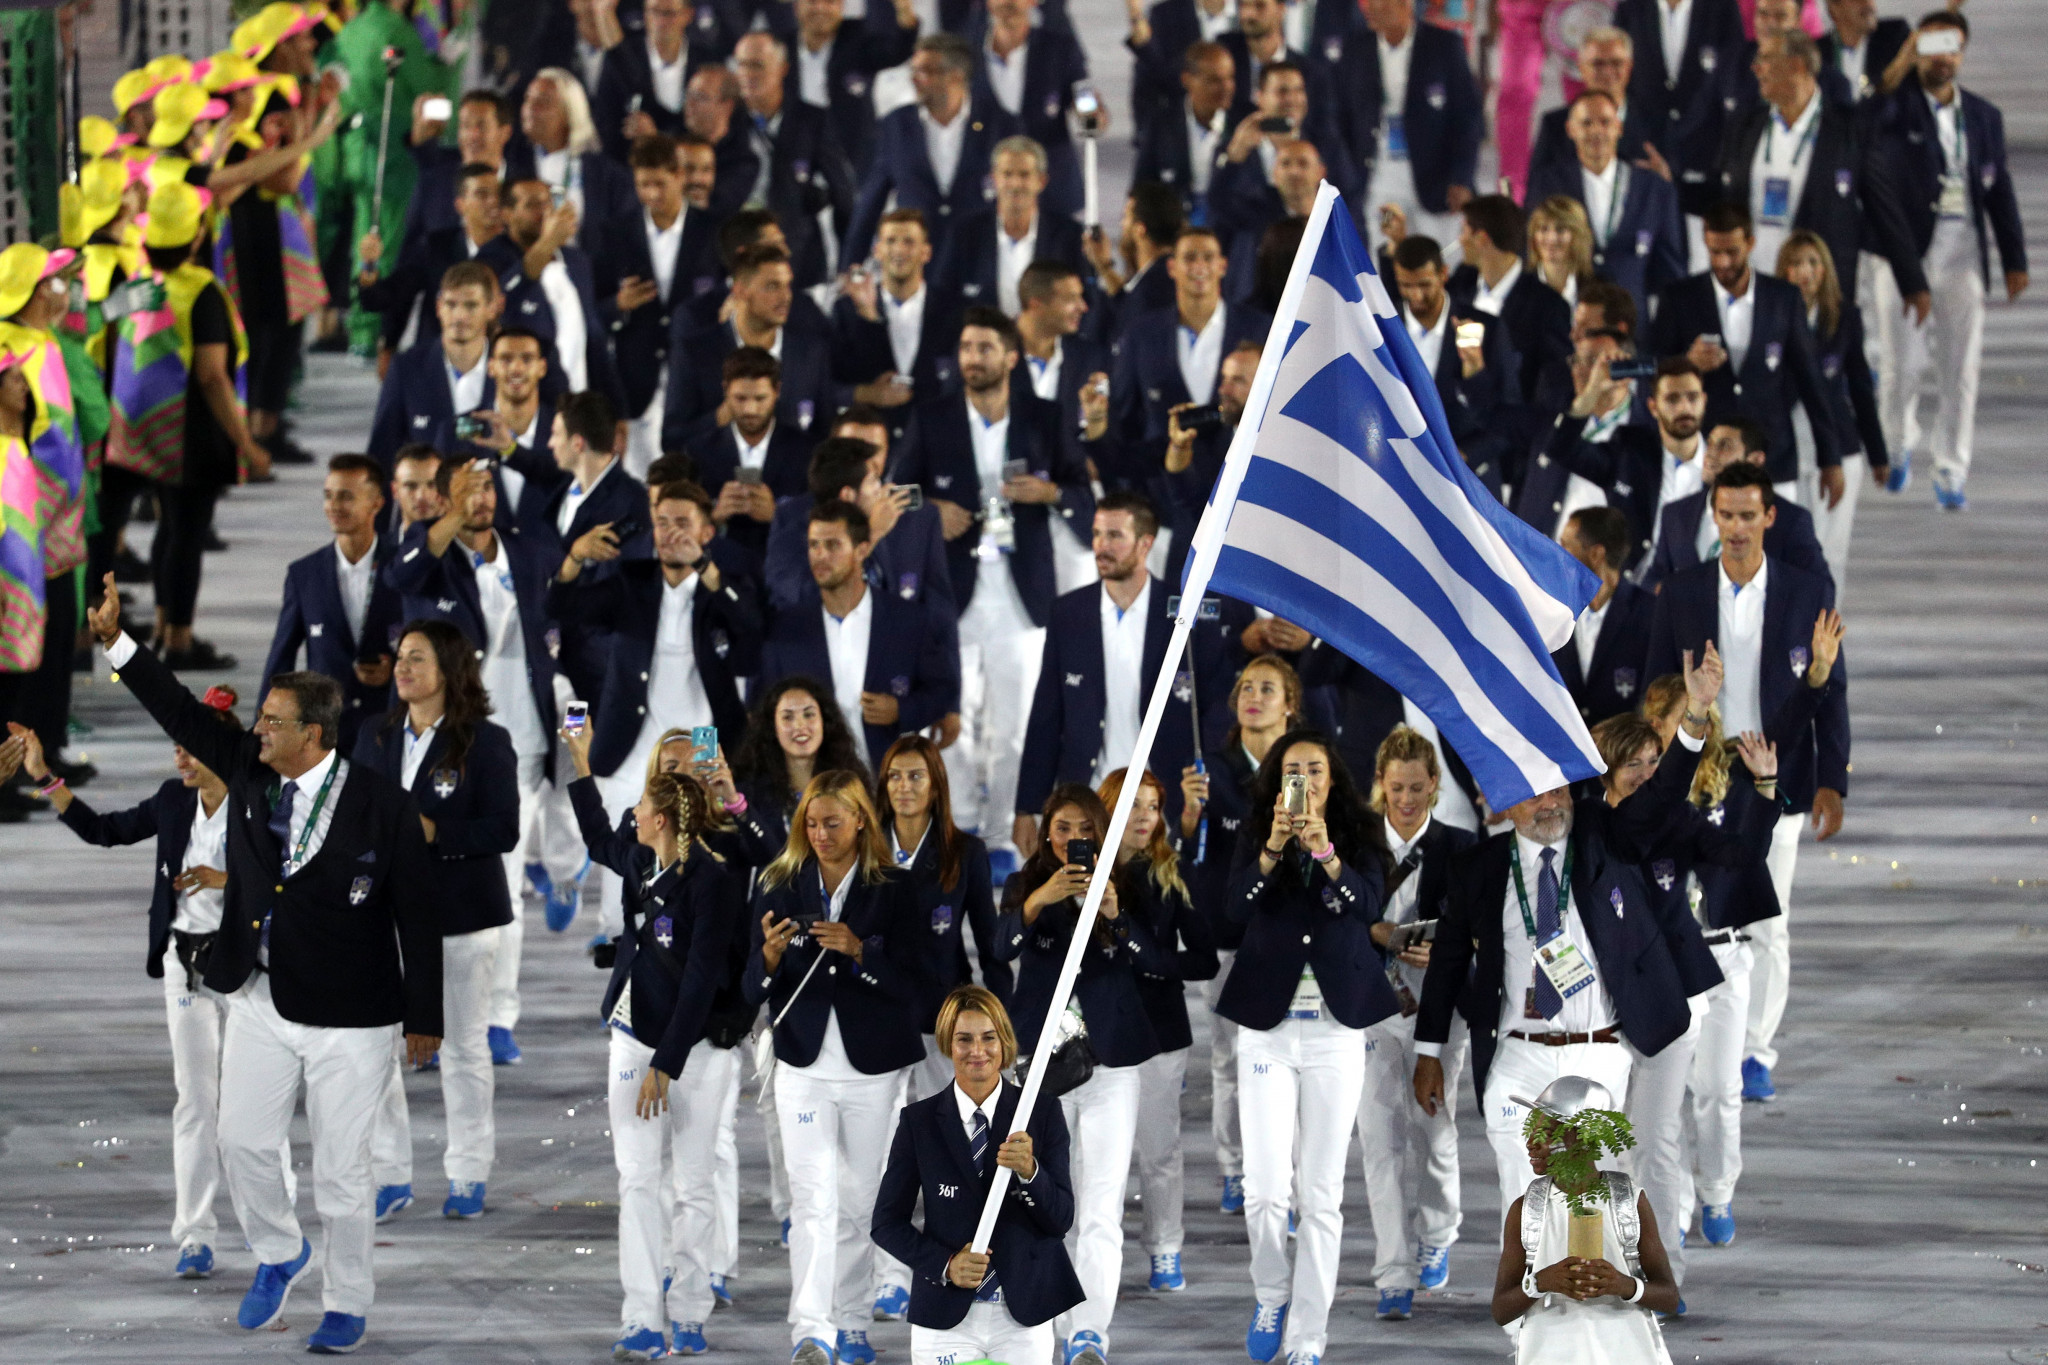 Greece has won four Olympic medals in taekwondo ©Getty Images